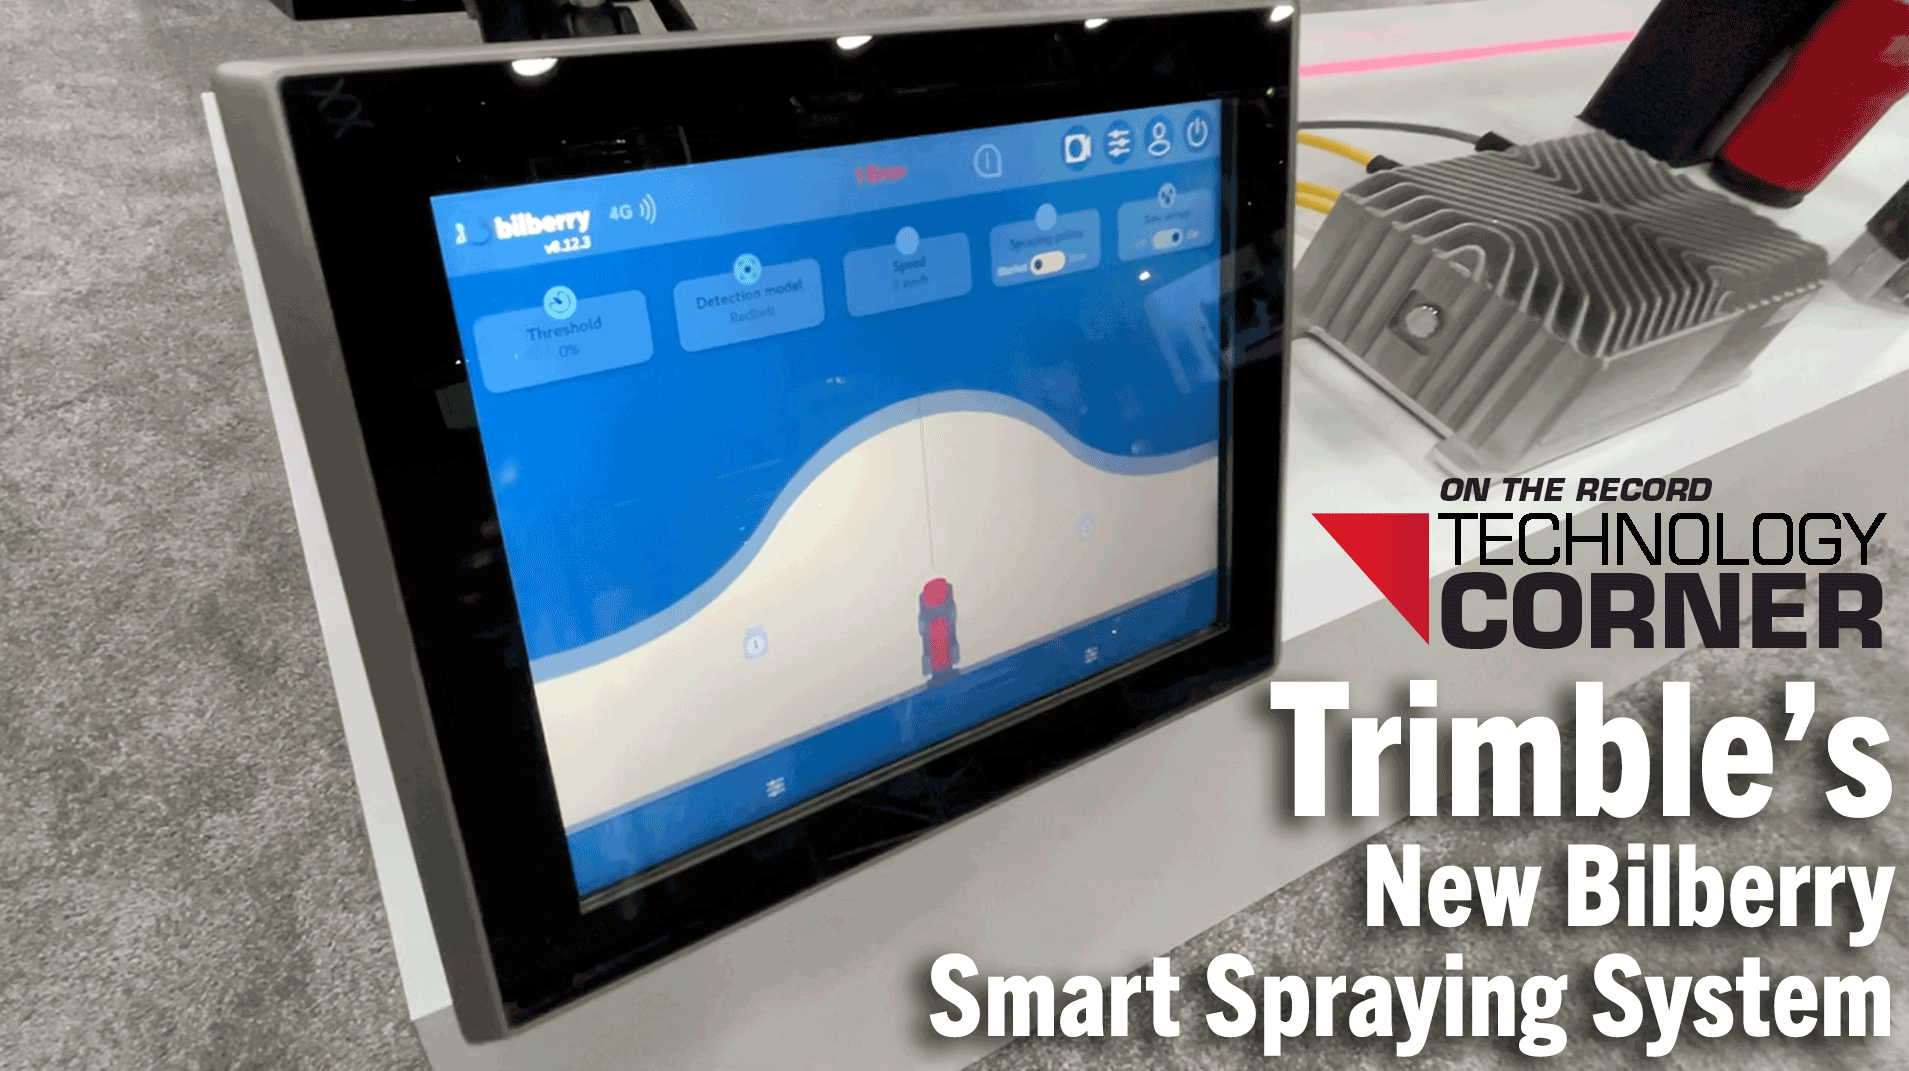 Trimble Introduces New Bilberry Smart Spraying System with Focus on Retrofitting